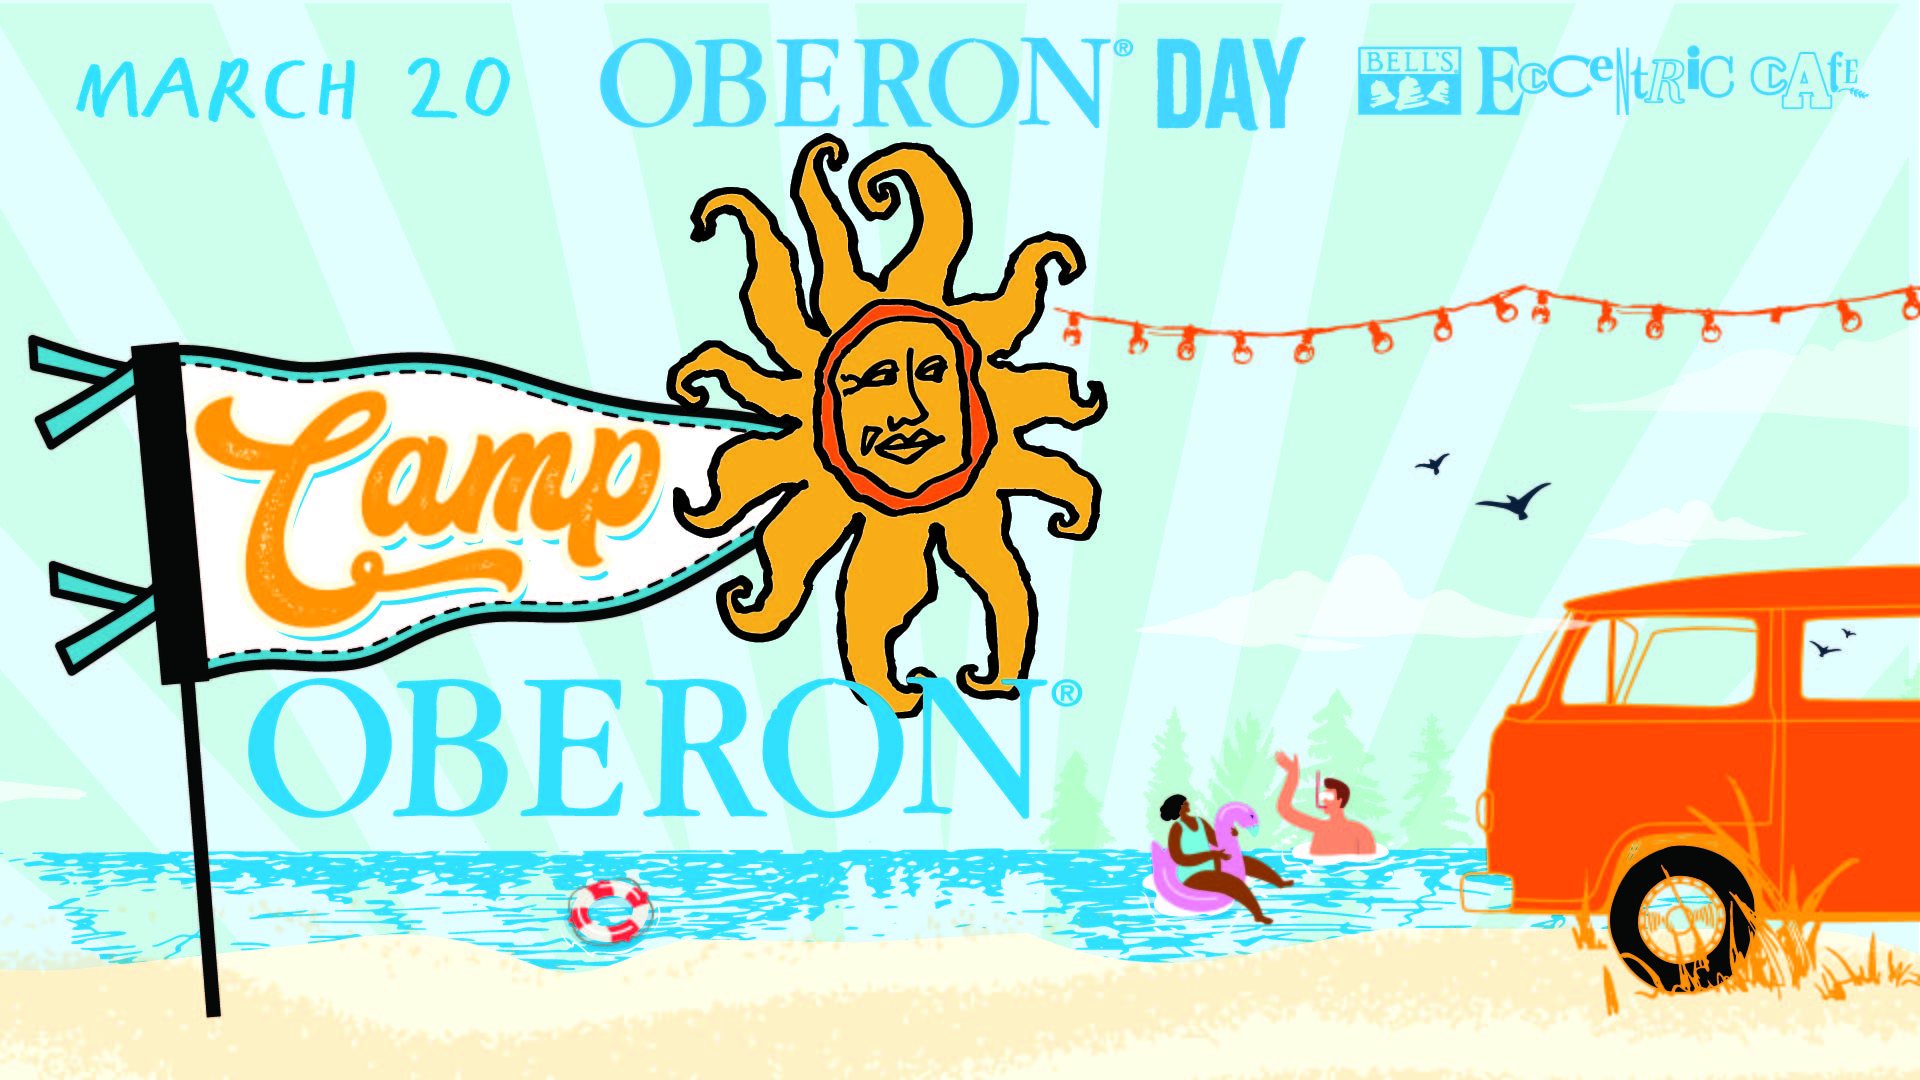 Bell's Brewery Camp Oberon Day - March 20, 2023 at Bell's Ecentric Cafe in Kalamazoo, Michigan